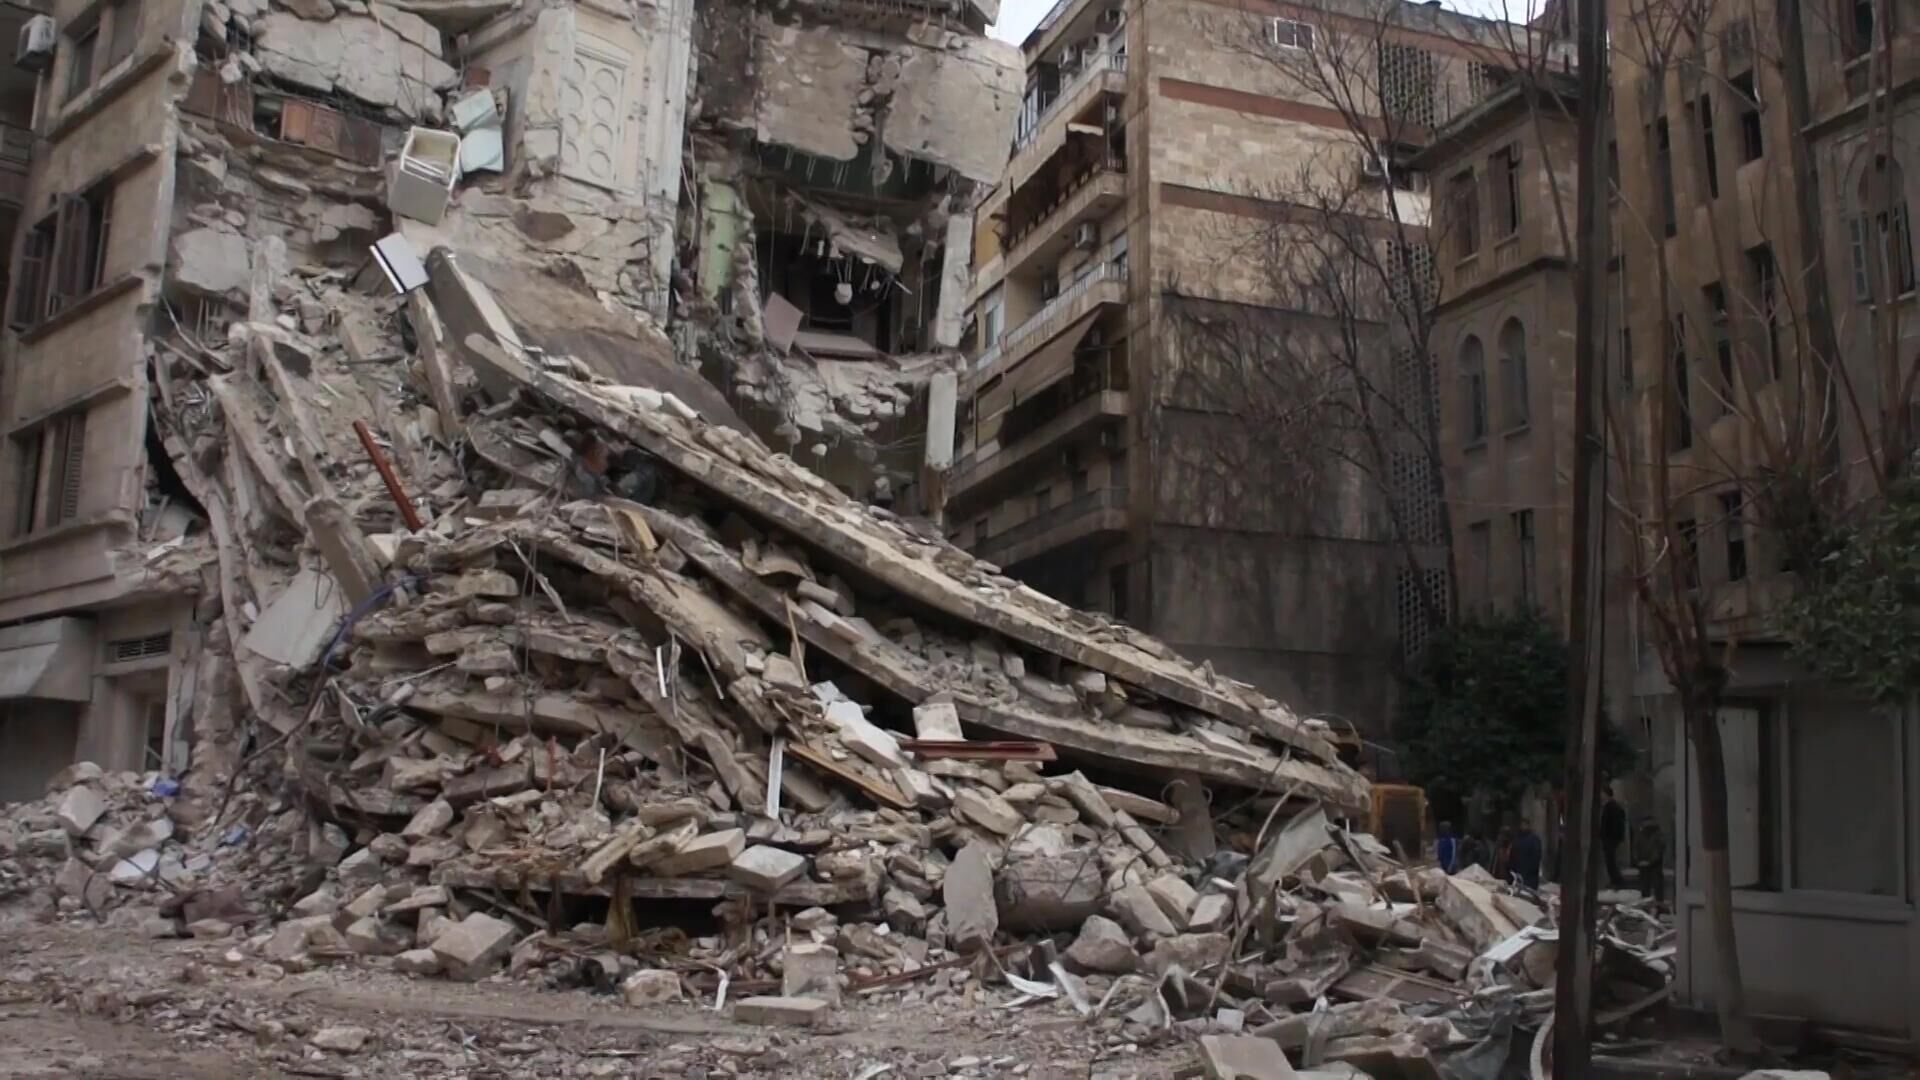 A residential building destroyed by a magnitude 7.8 earthquake that occurred on February 6 is seen in Aleppo, Syria - Sputnik India, 1920, 10.02.2023